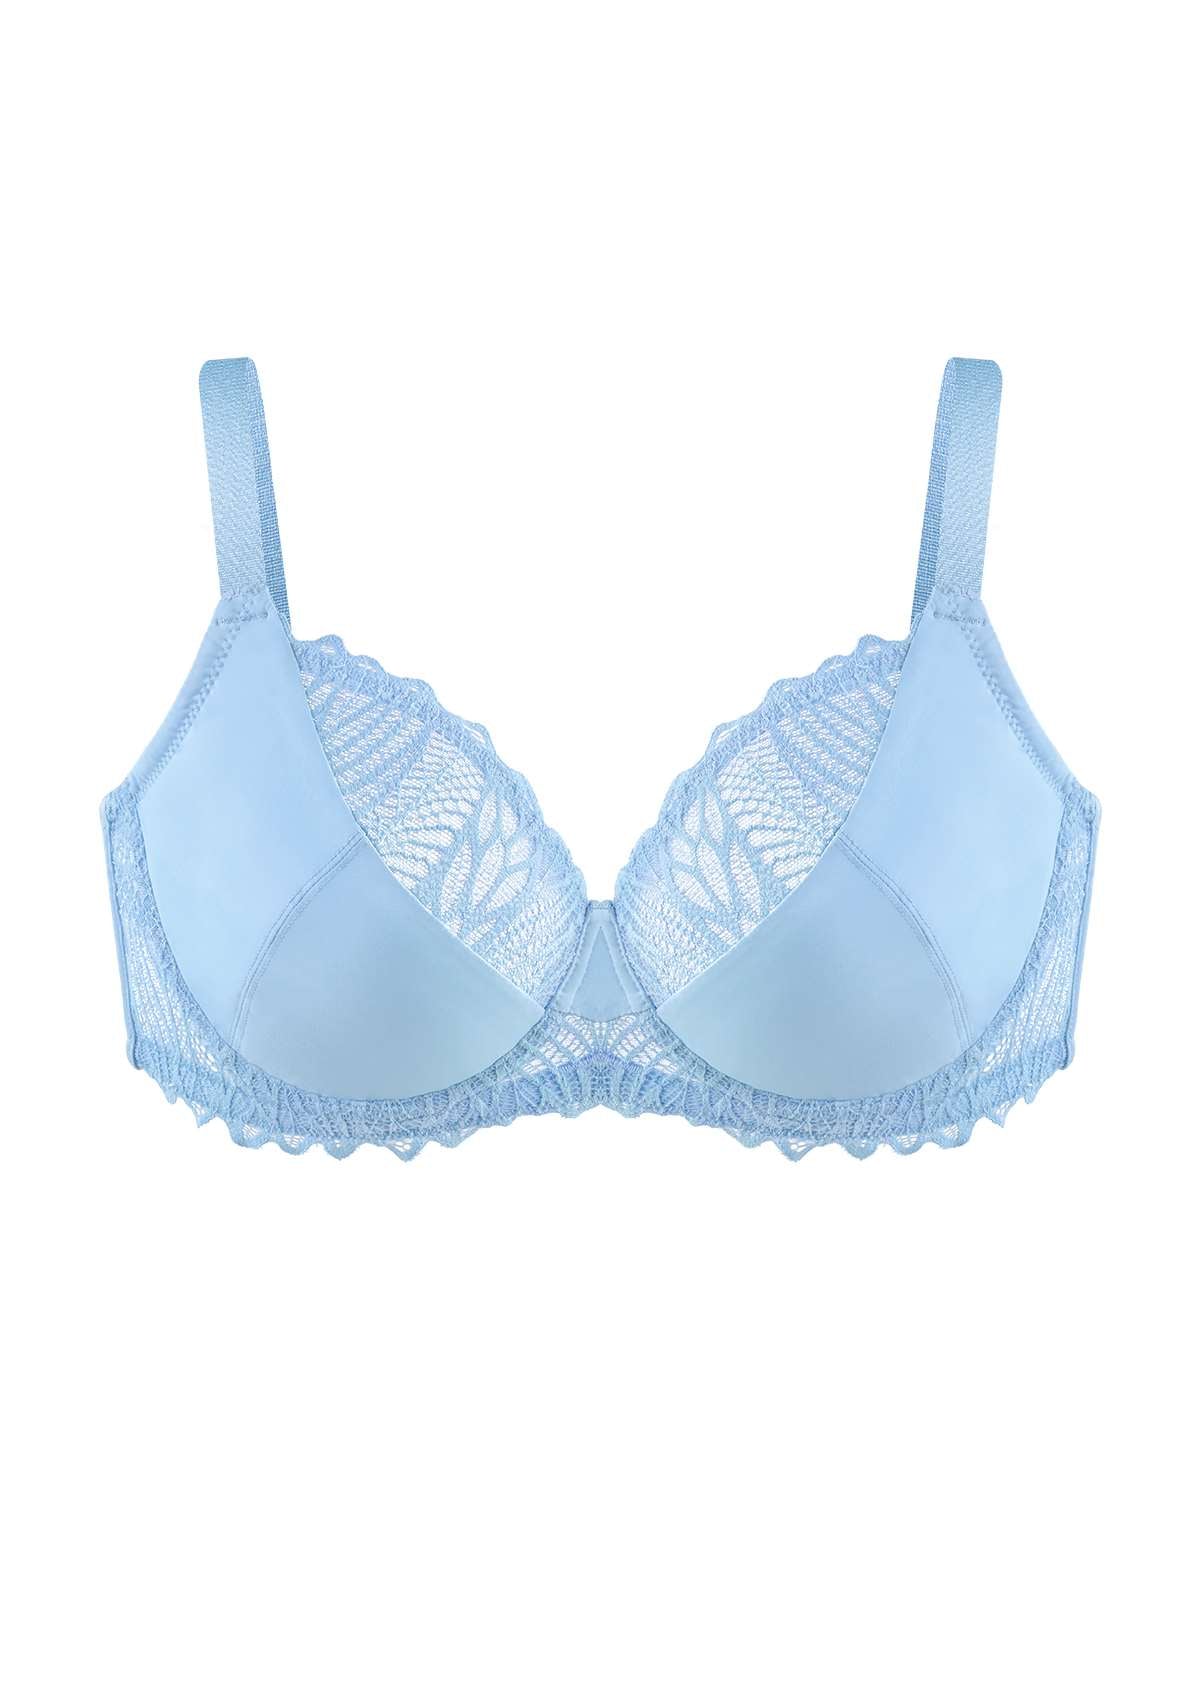 HSIA Pretty Secrets Lace-Trimmed Full Coverage Underwire Bra For Support - Light Blue / 34 / D